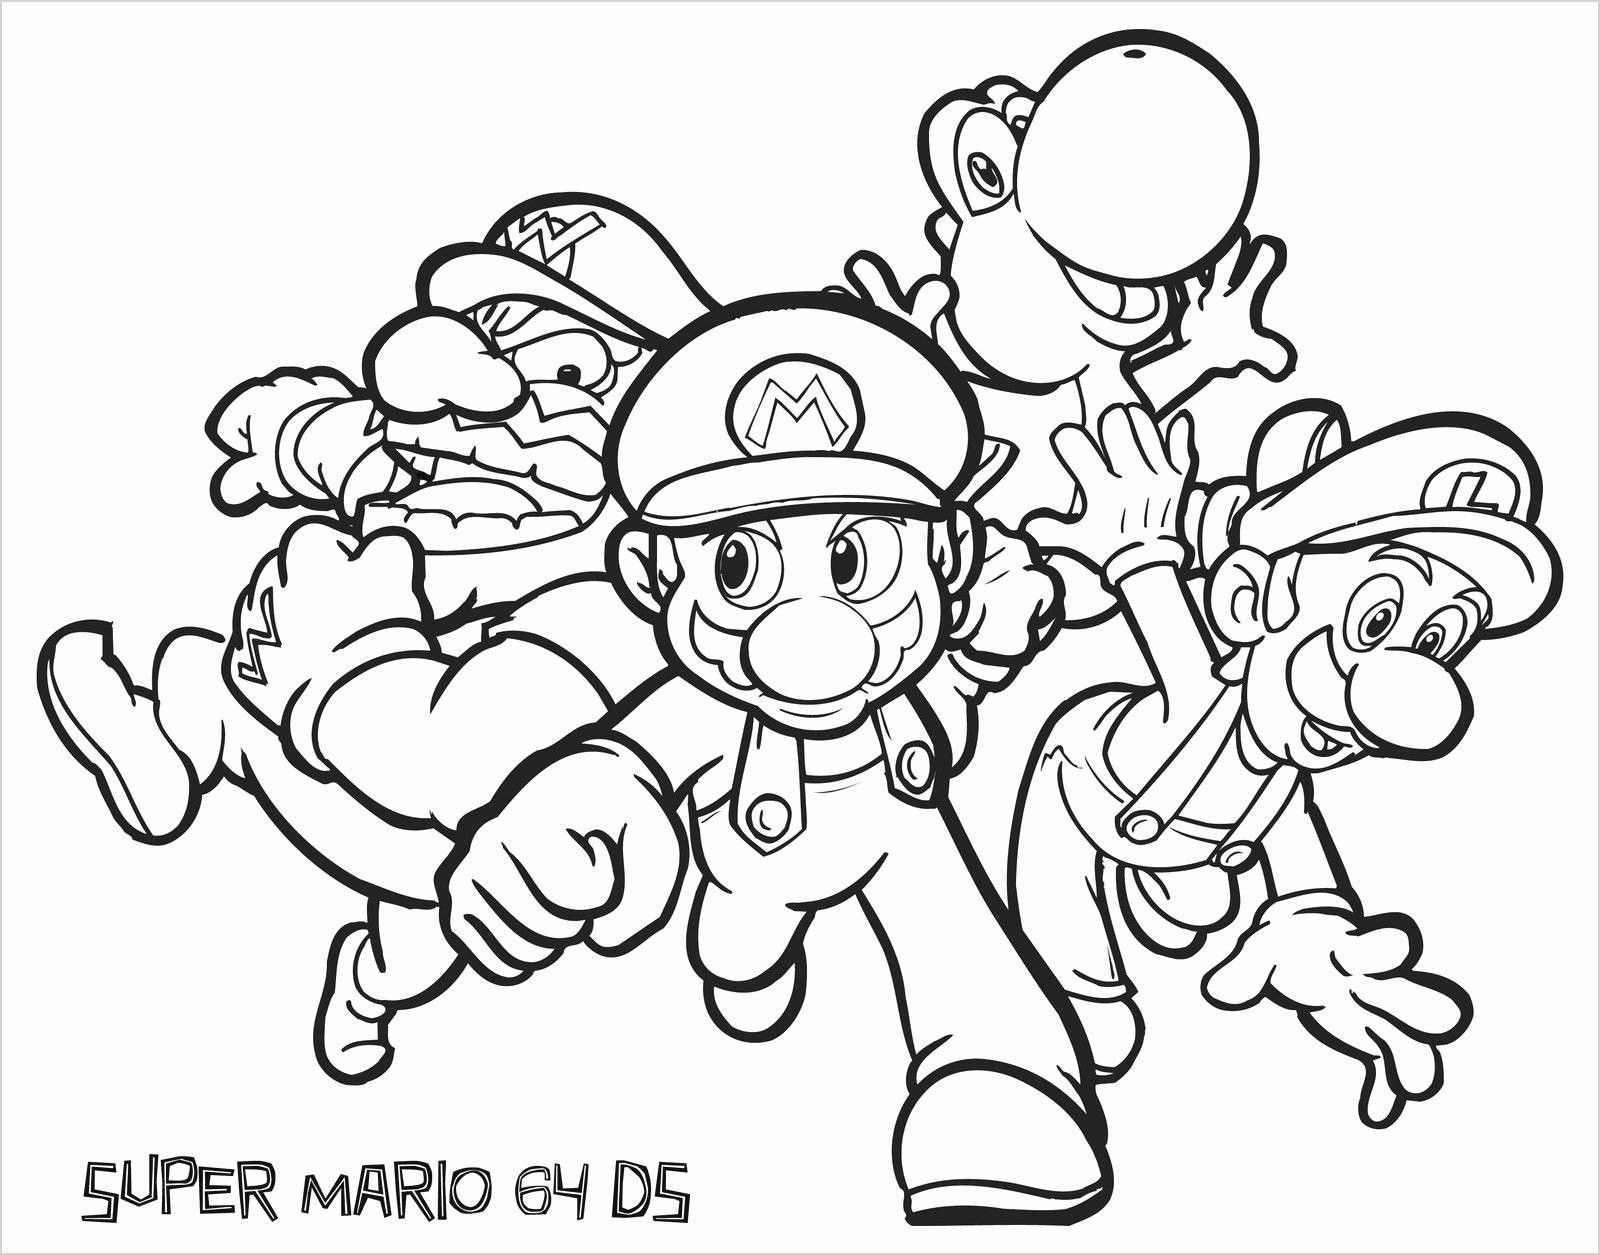 Coloring Book Google Play Lovely Luxury Bowser And Bowser Jr Coloring Pages Kursknews Cartoon Coloring Pages Cool Coloring Pages Mario Coloring Pages